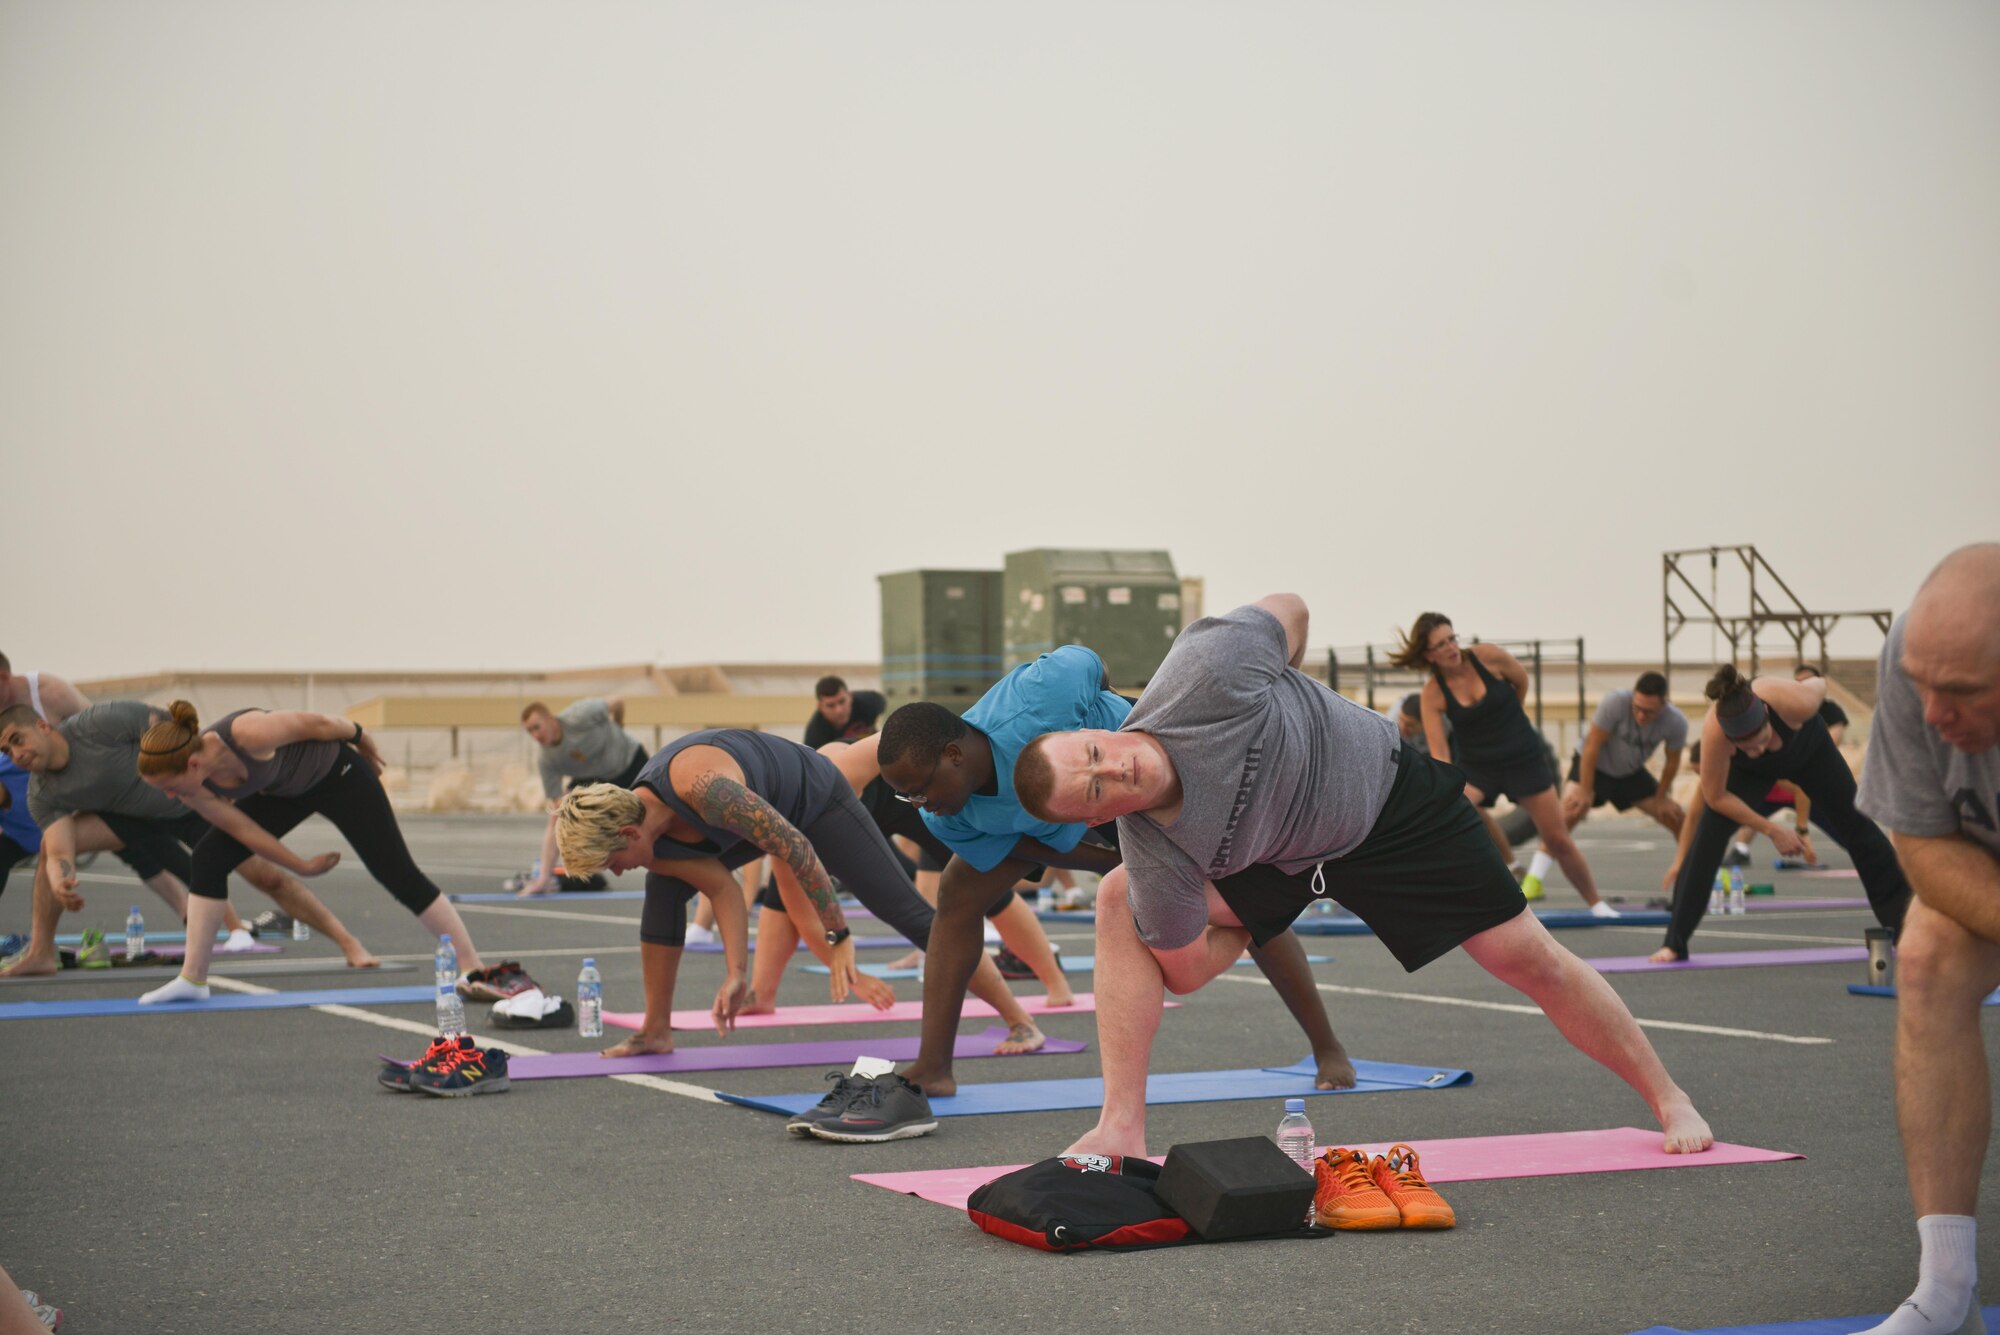 Deployed Soldiers, sailors, airmen, marines, coalition partners and civilians go into the Vine pose during the largest Yoga session to take place in Qatar history July 11, 2015 Al Udeid Air Base, Qatar. This event opened its doors to all levels of practitioners from novice to expert. It allowed the fine men and women assigned to Al Udeid Air Base to relax and enjoy a different kind of exercise in a neutral environment. (U.S. Air Force photo/Staff Sgt. Alexandre Montes)